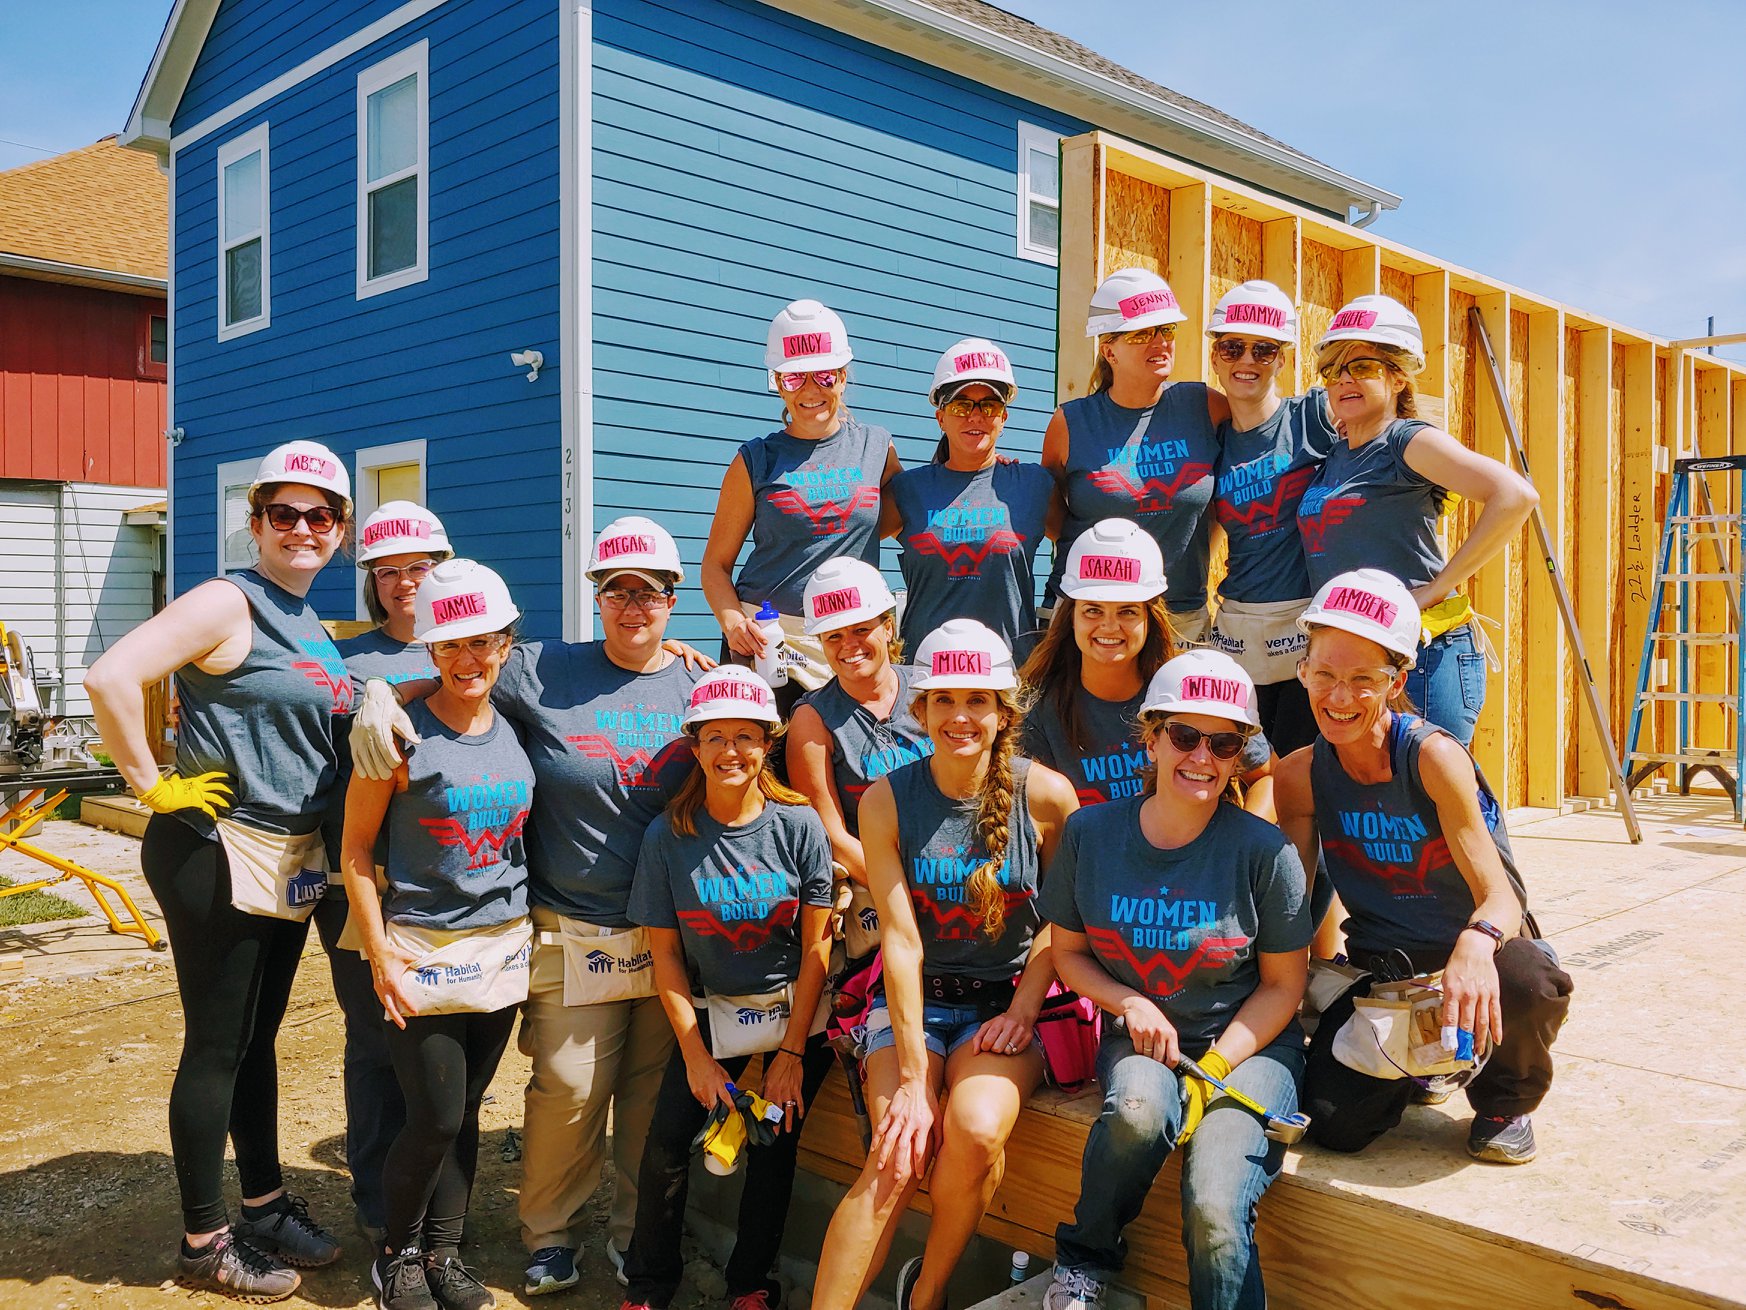 Julie Perry volunteering with Habitat for Humanity of Greater Indianapolis in its annual Women Build initiative.